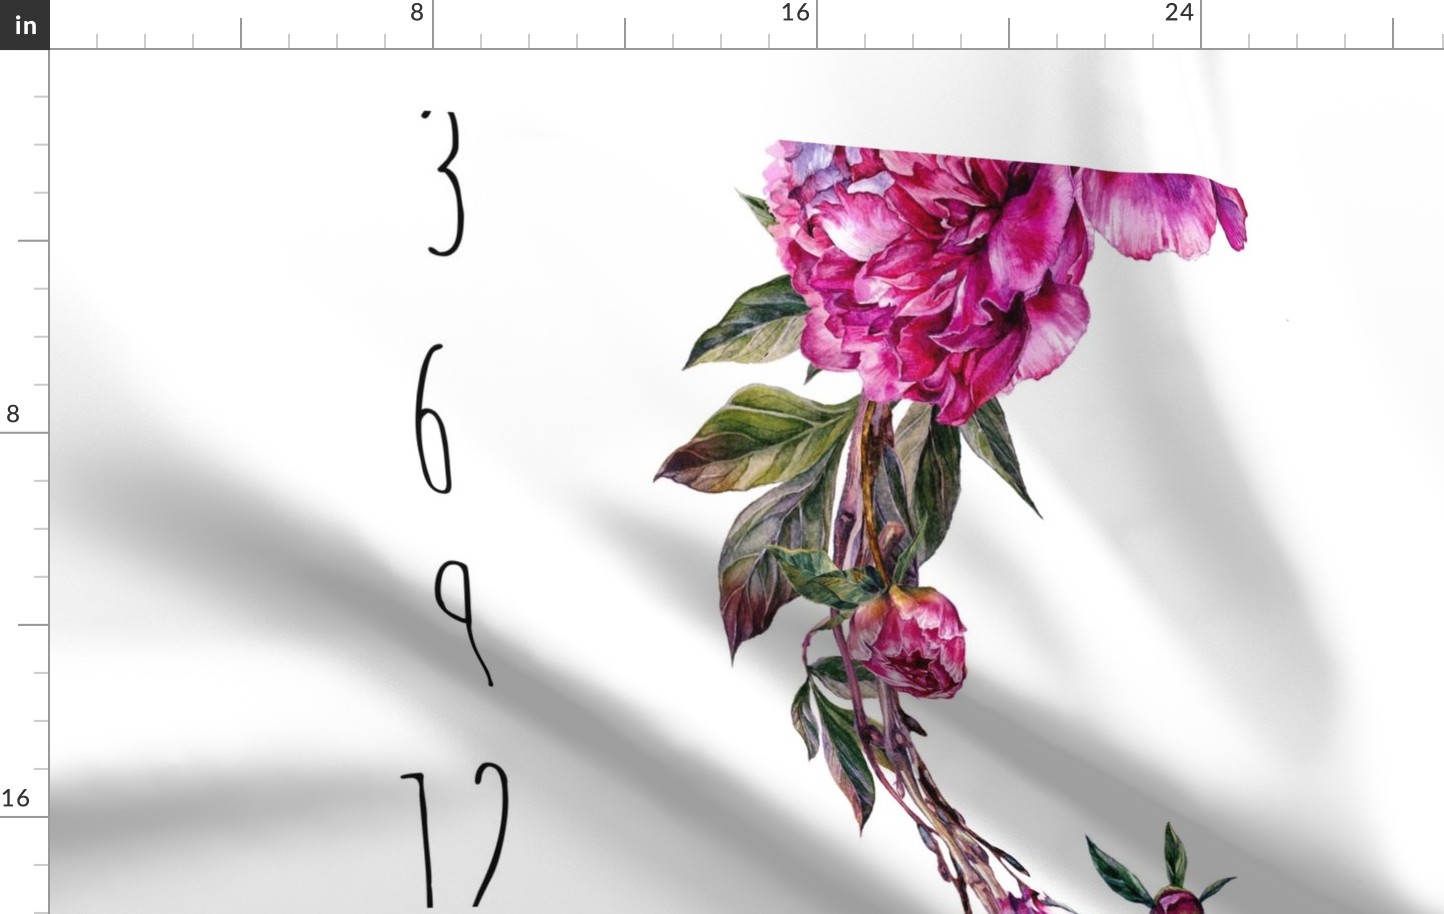 French 1-Meter // Peony Blooms Baby Milestone